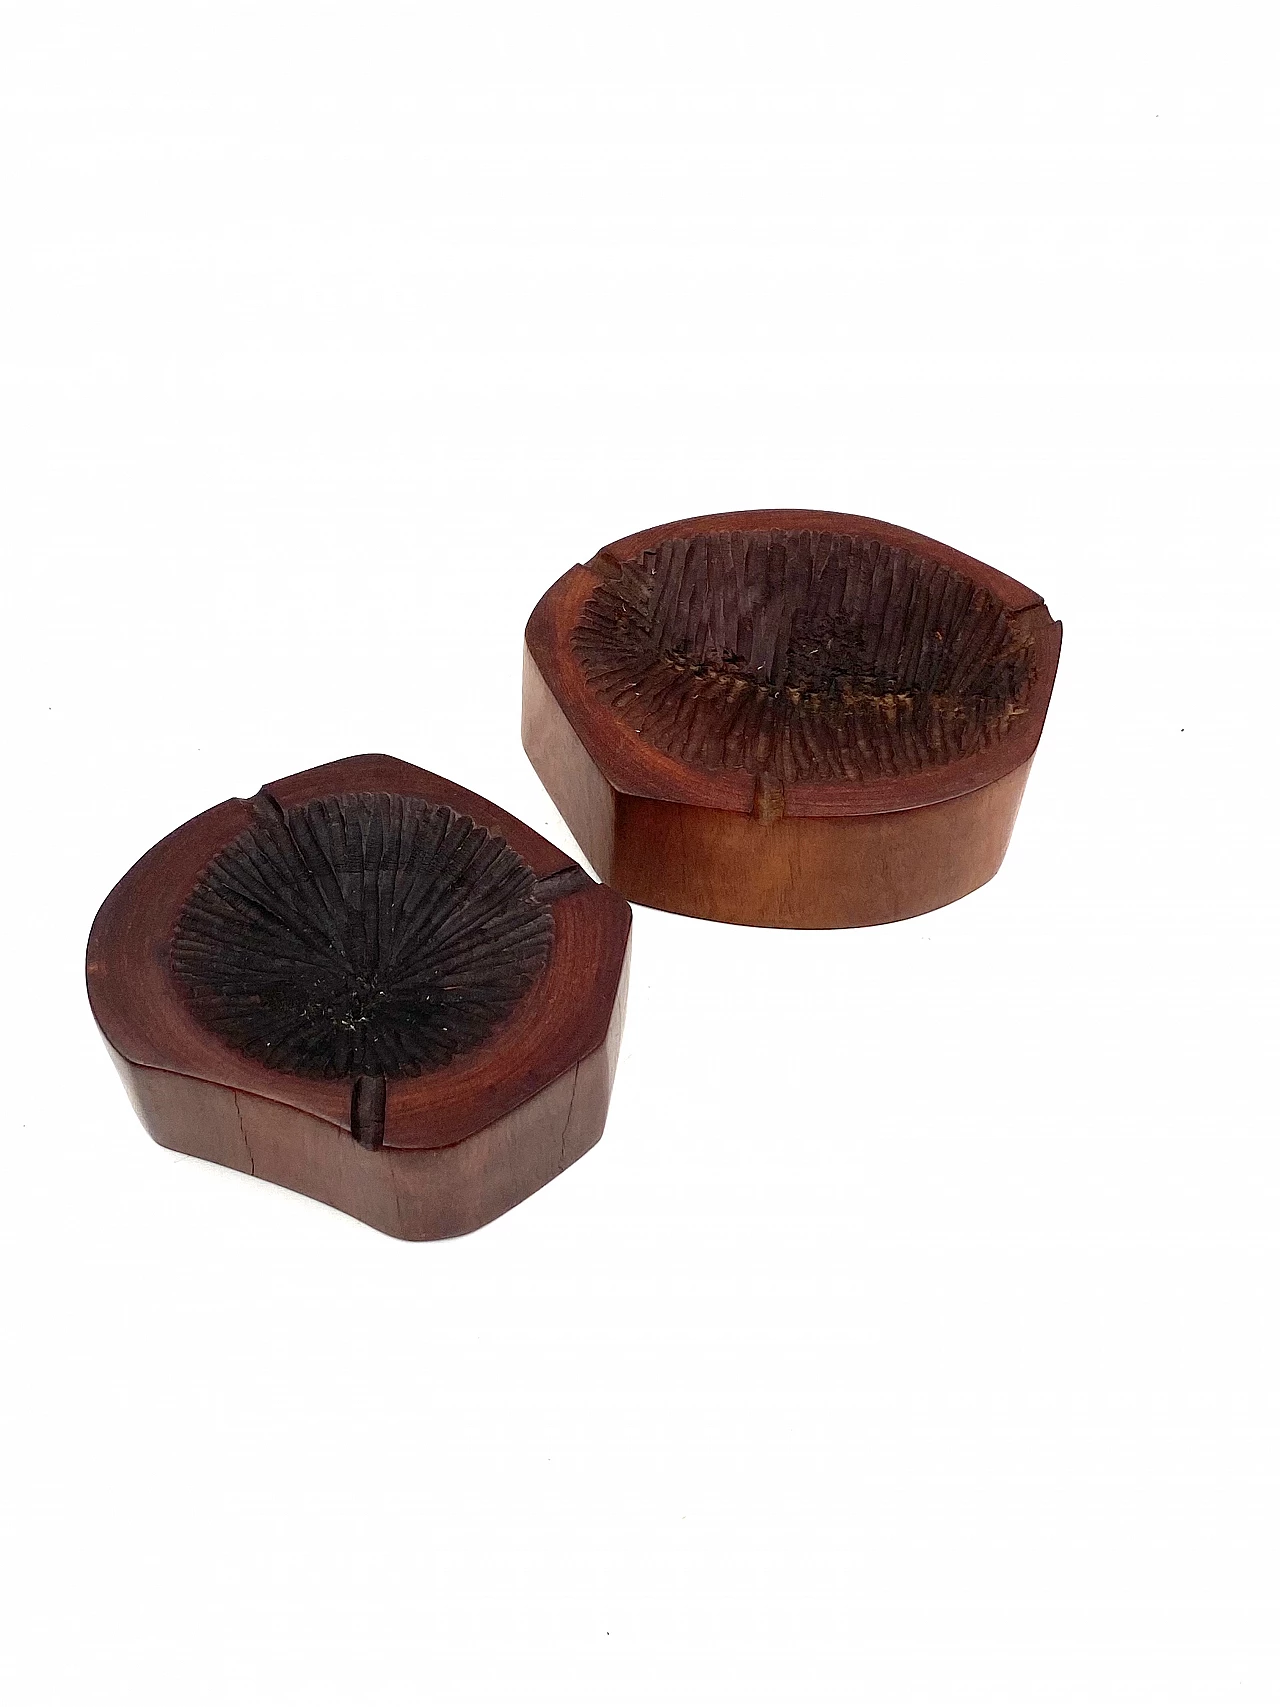 Pair of wooden ashtrays in Monique Gerber's style, 1970s 12